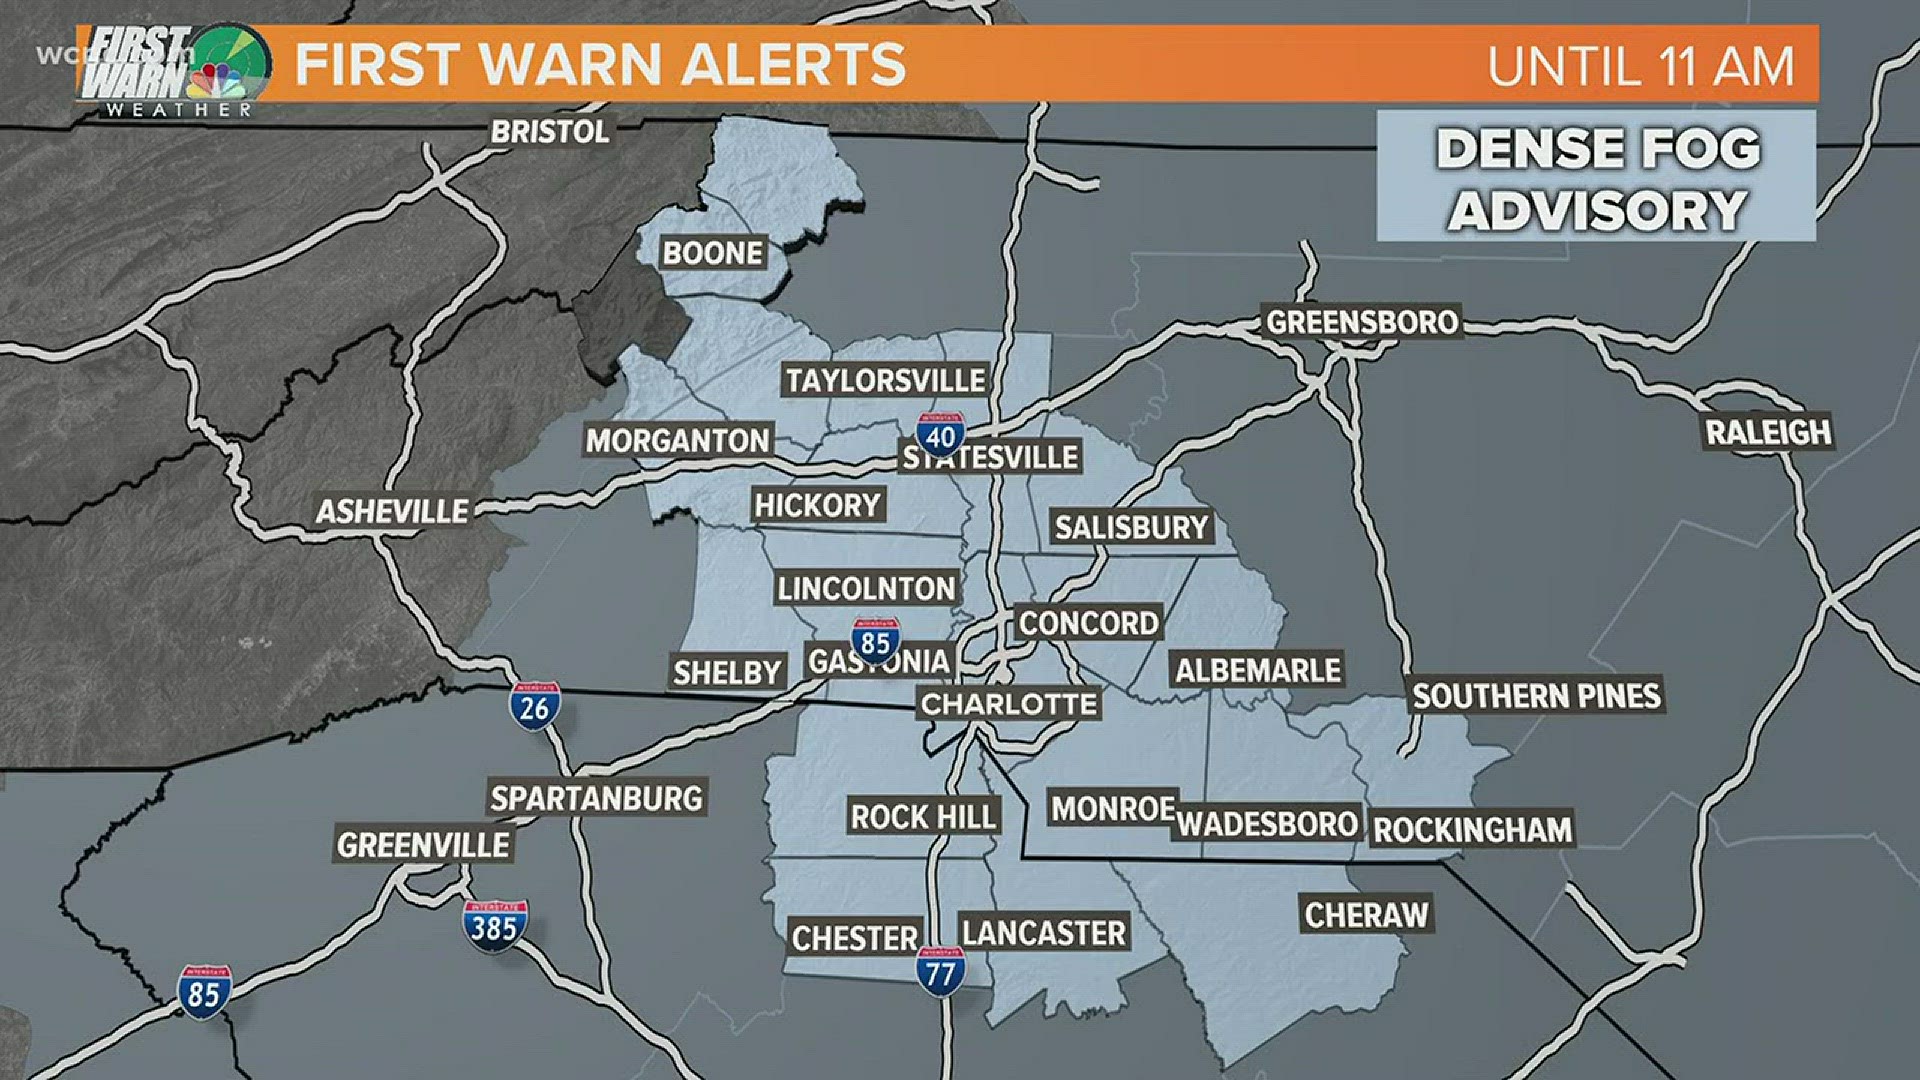 A dense fog advisory is in effect for the entire viewing area until 11 a.m. Tuesday.